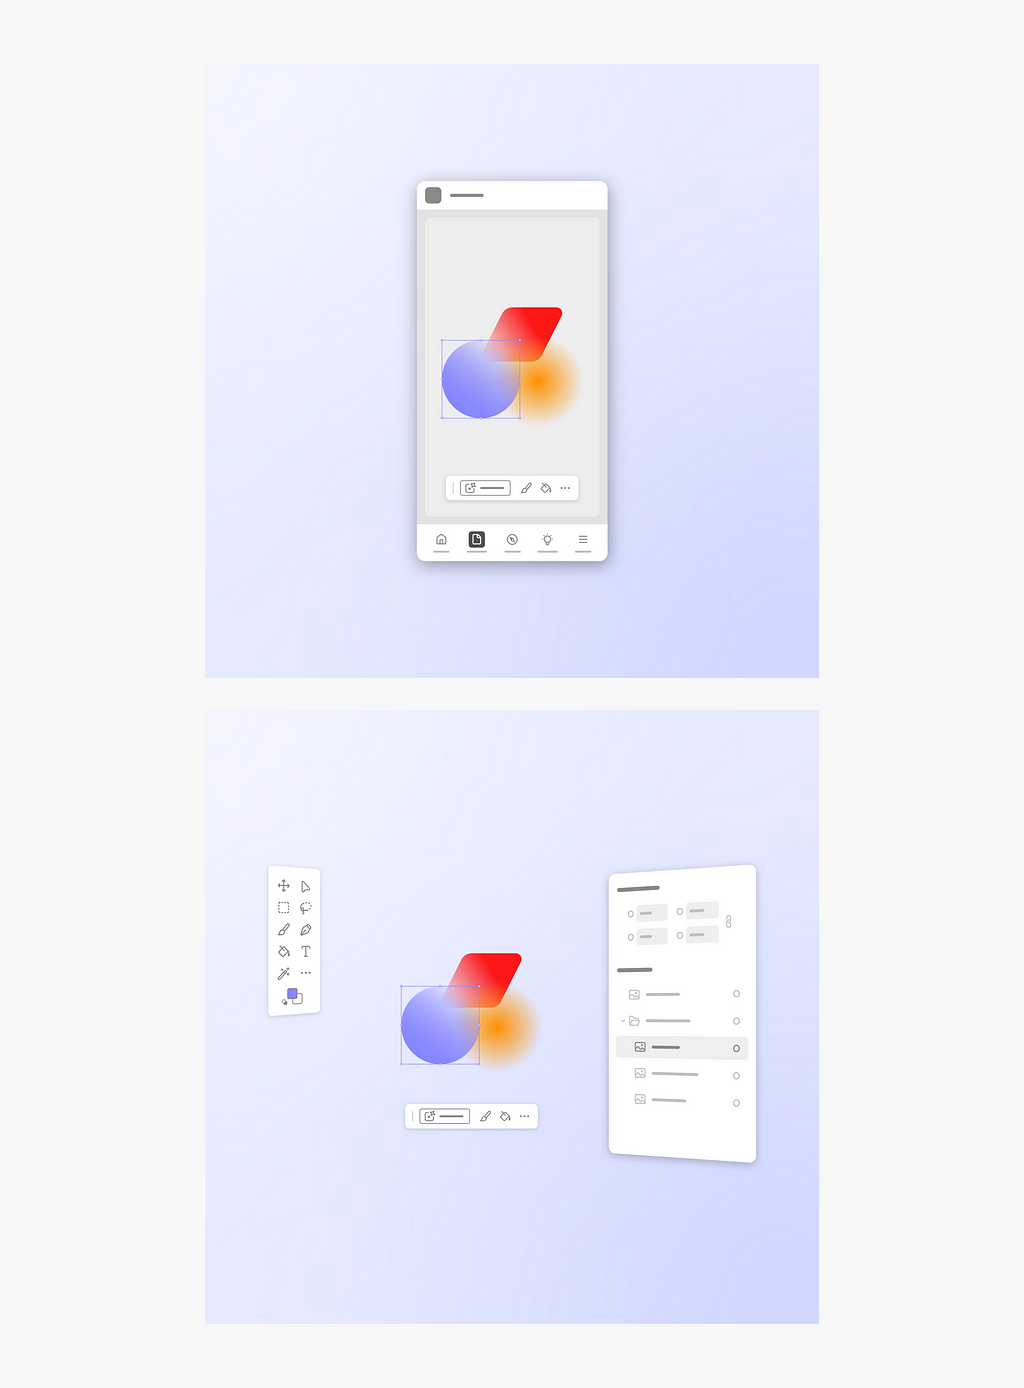 Two digital mockups of Spectrum 2 graphics (a blue circle, a red parallelogram, and a yellow orange sunburst) on the home screen of an iPhone app. The top image shows the graphics on an art board in an iPhone app on a lavender background. The bottom image shows the same components of the iPhone app in an expanded view (clockwise from left: a left-side toolbar, graphics on an art board, a file folder menu, and a bottom toolbar) on a lavender background.